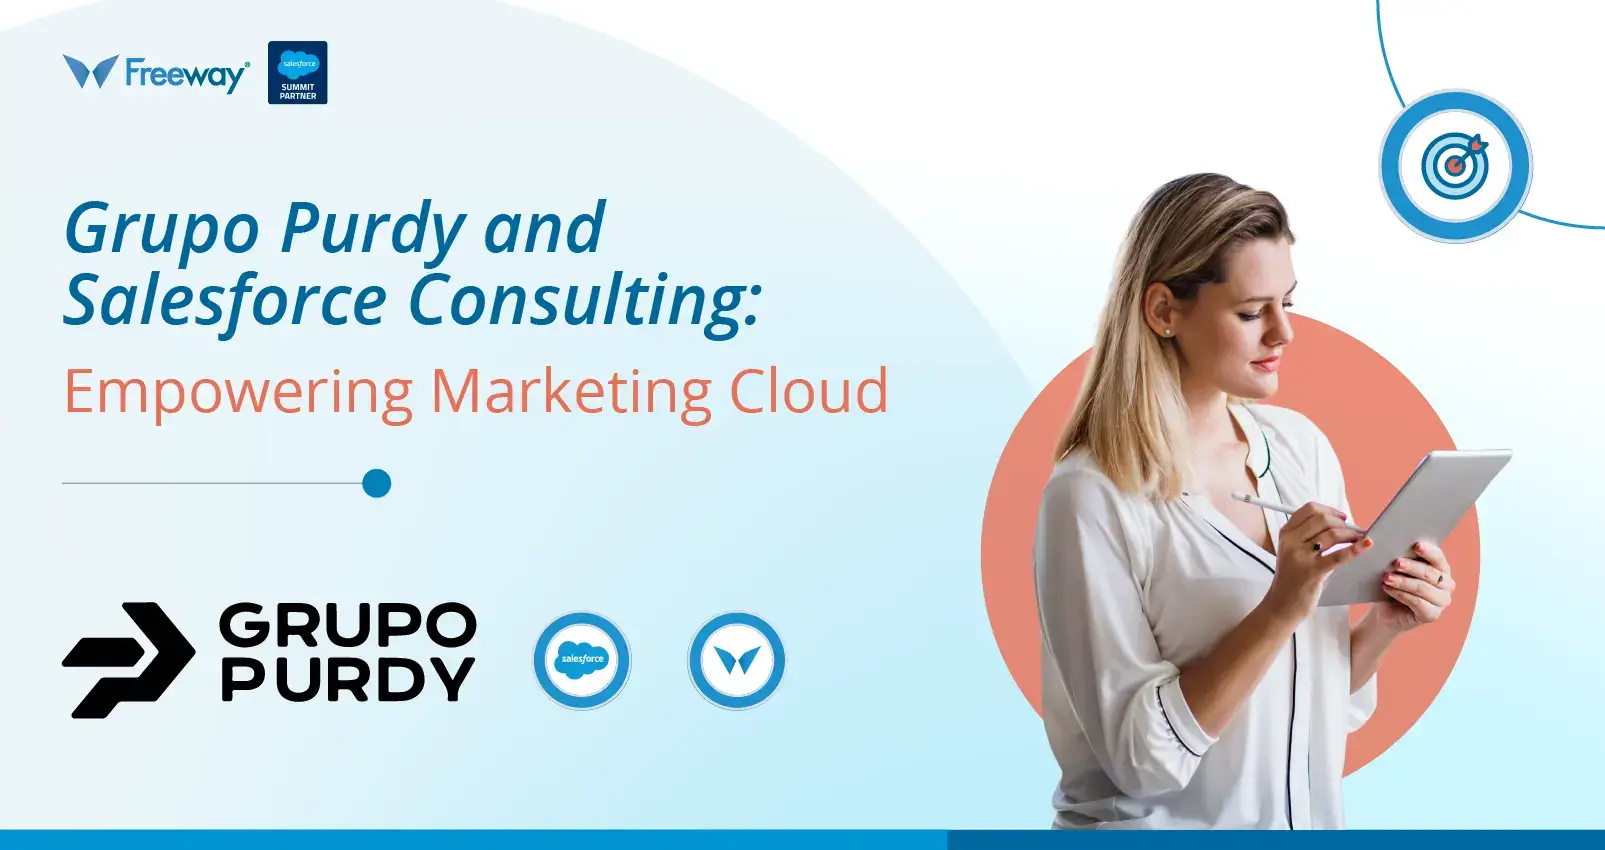 Optimizing Marketing Cloud Potential: Grupo Purdy's Success with Freeway Salesforce Consulting